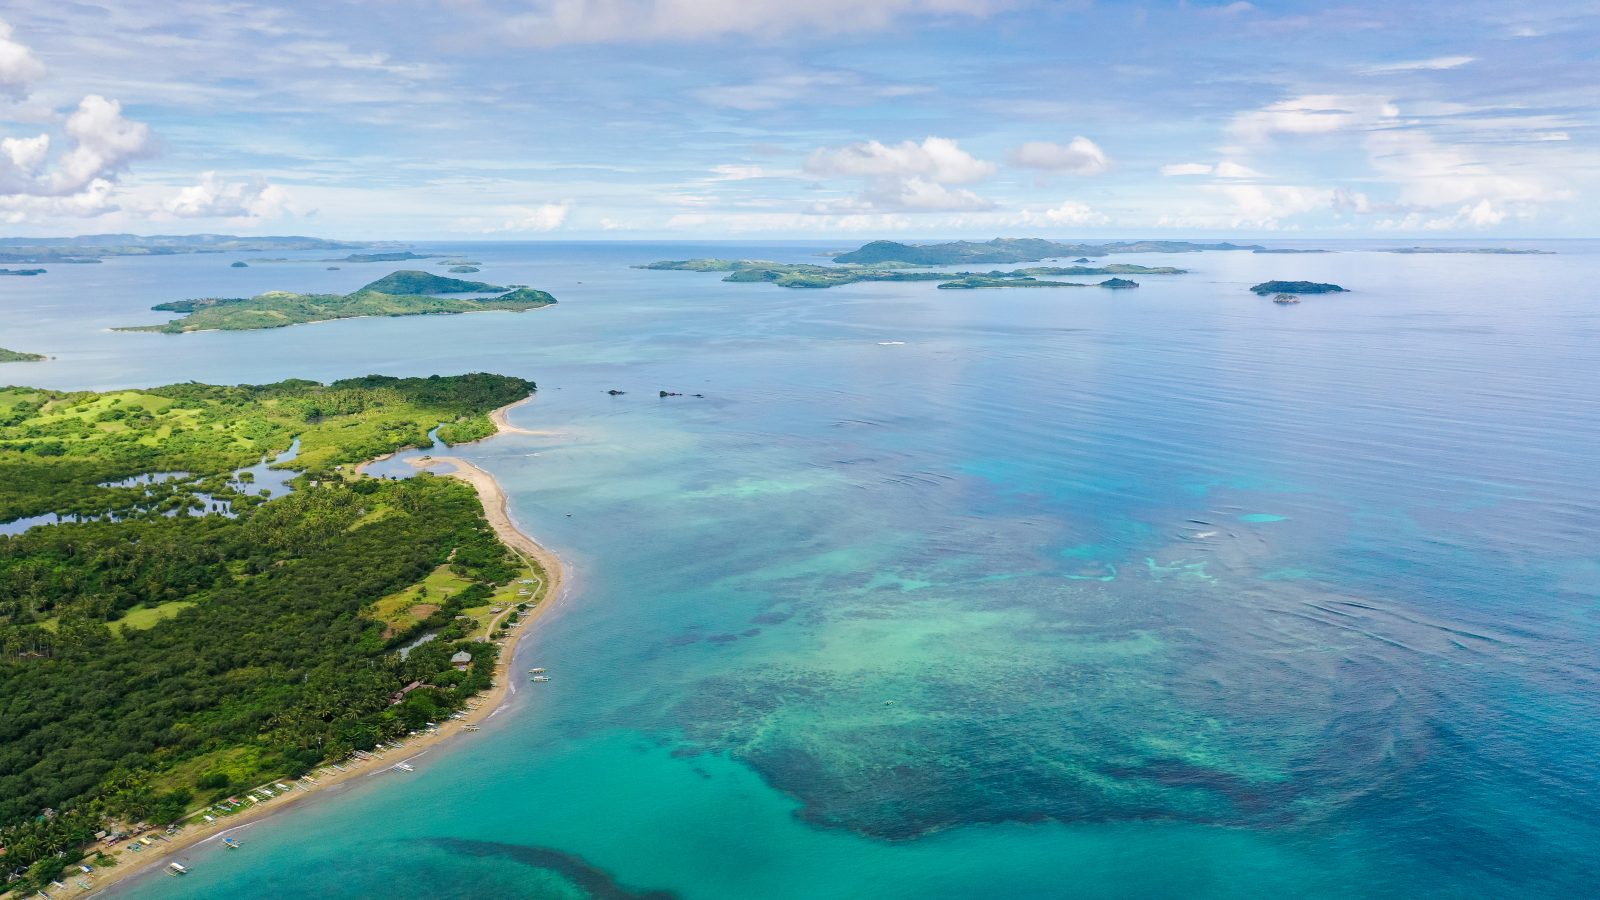 Malay archipelago with reefs and islands. Seascape with islands in the early morning, aerial drone. Beautiful landscape on the island of Luzon. Caramoan Islands, Philippines.